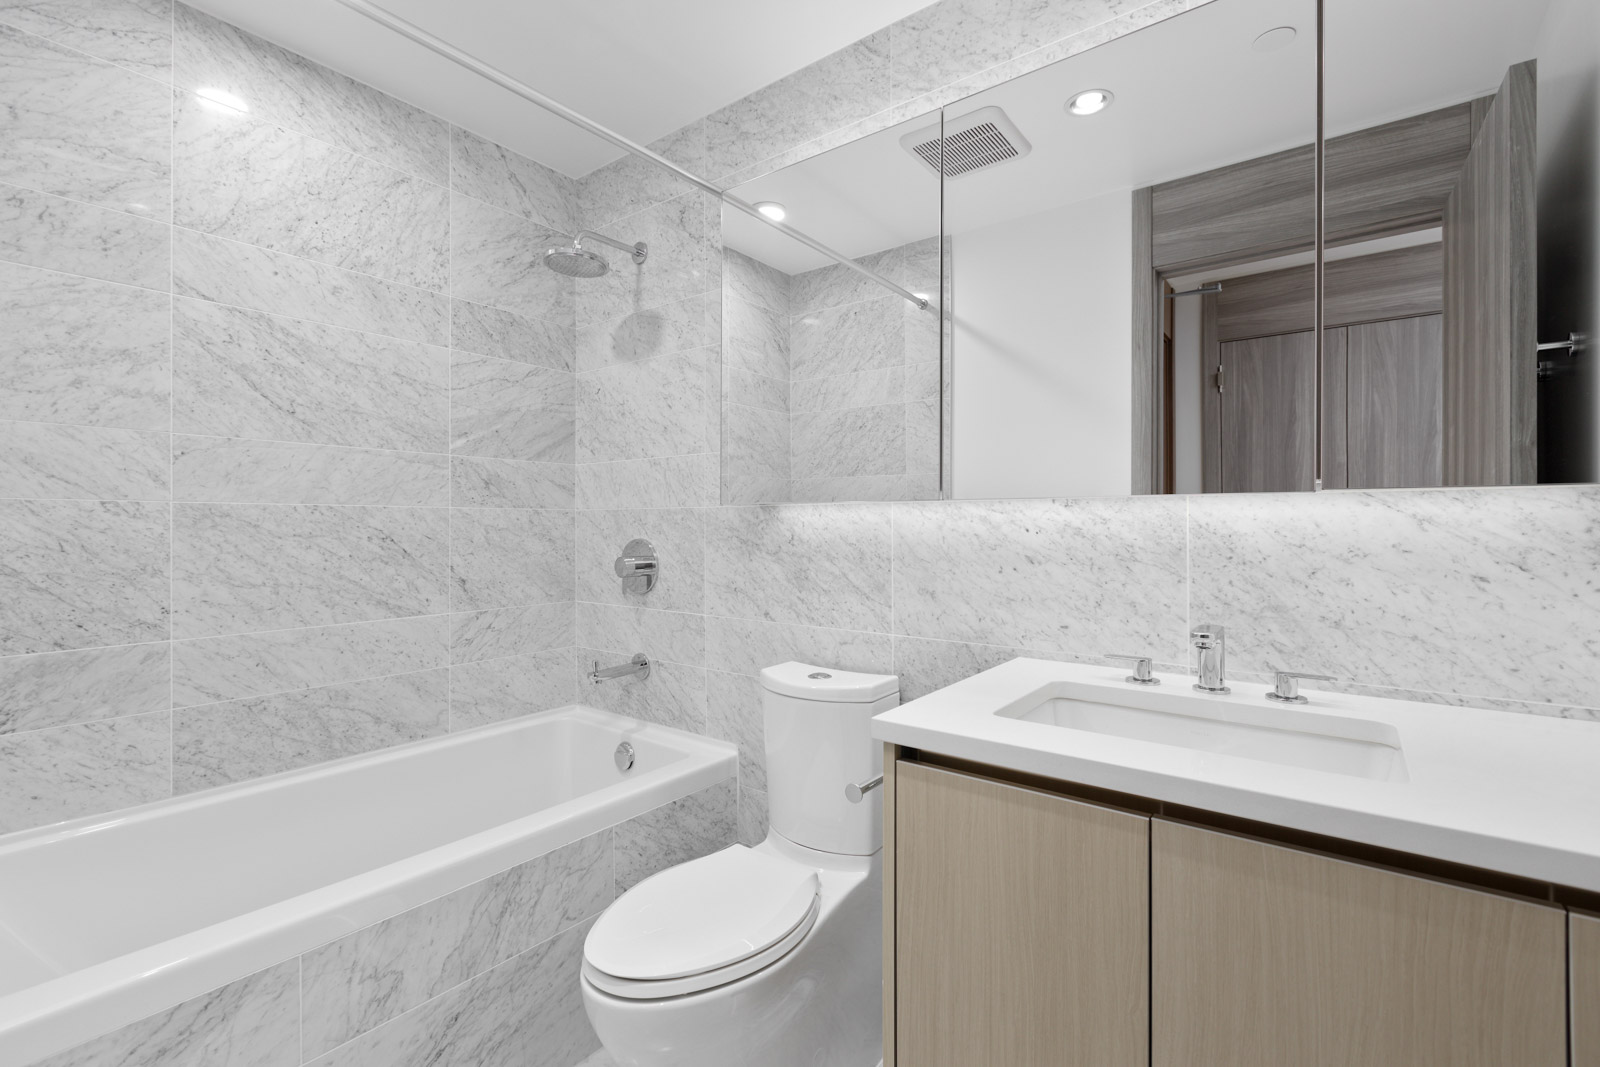 marble design washroom with soaker tub, toilet and sink with under cabinet space. All white and large mirror.